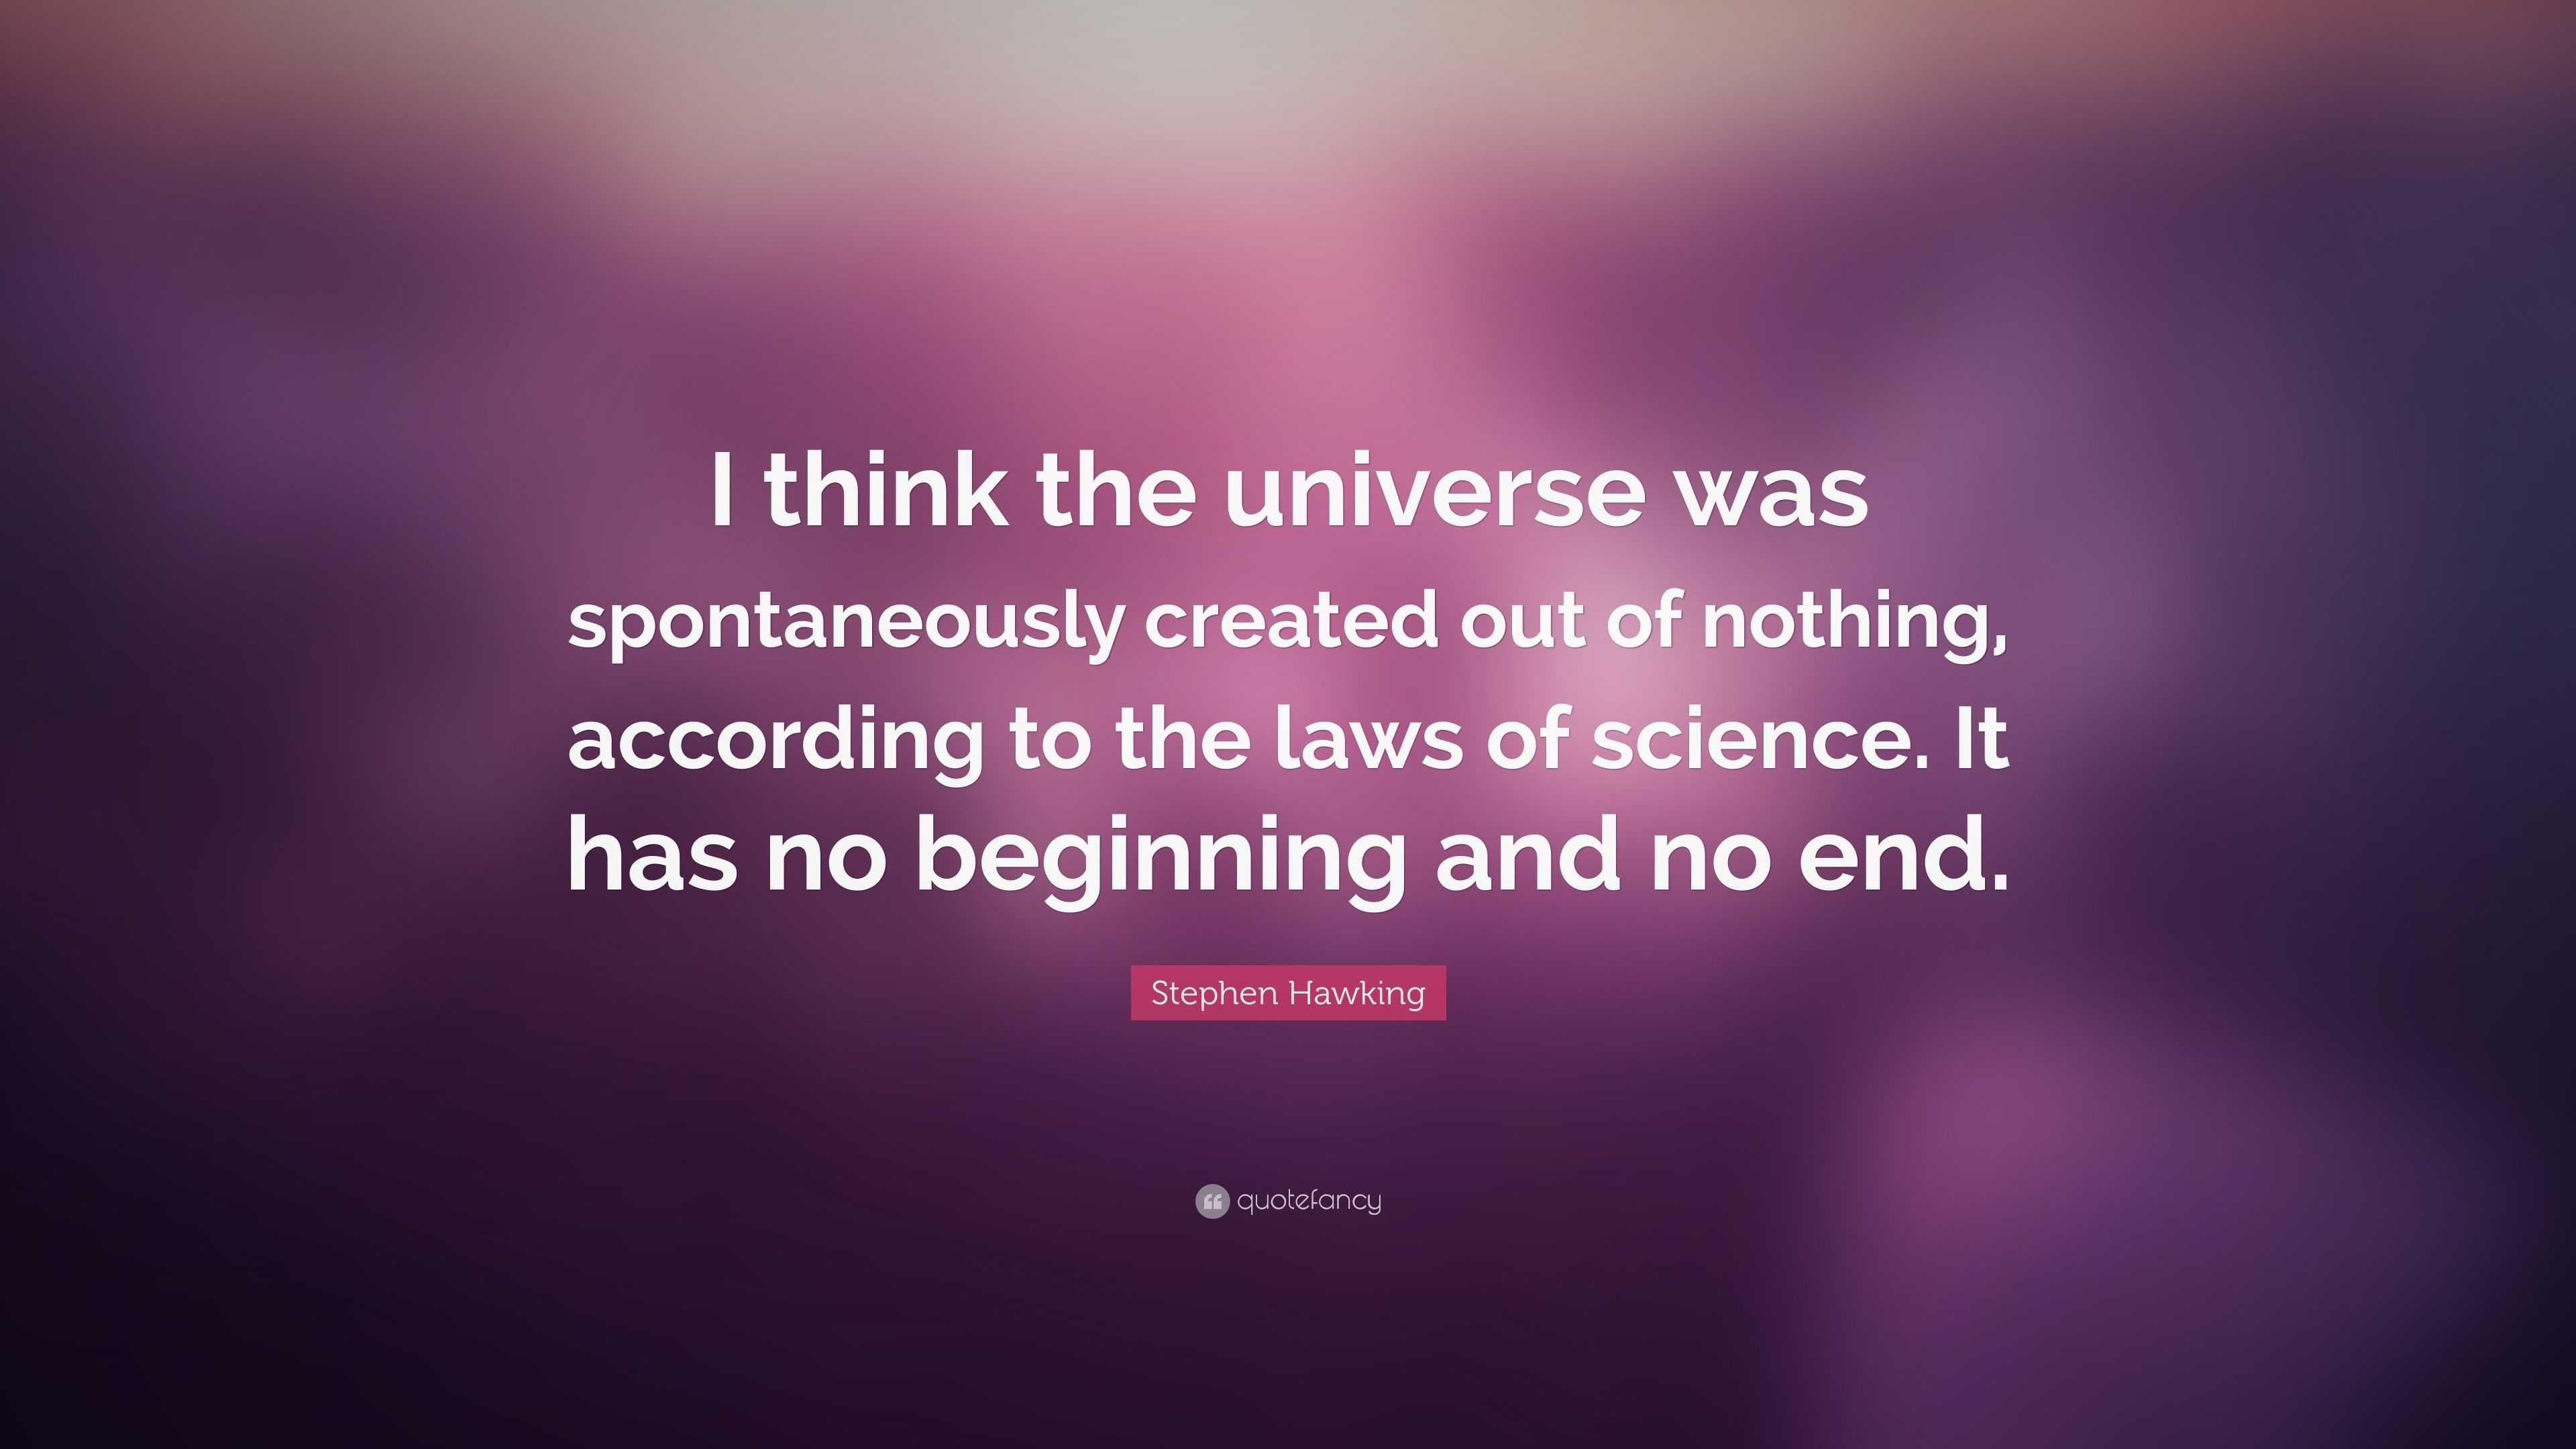 Stephen Hawking Quote: “I think the universe was spontaneously created ...